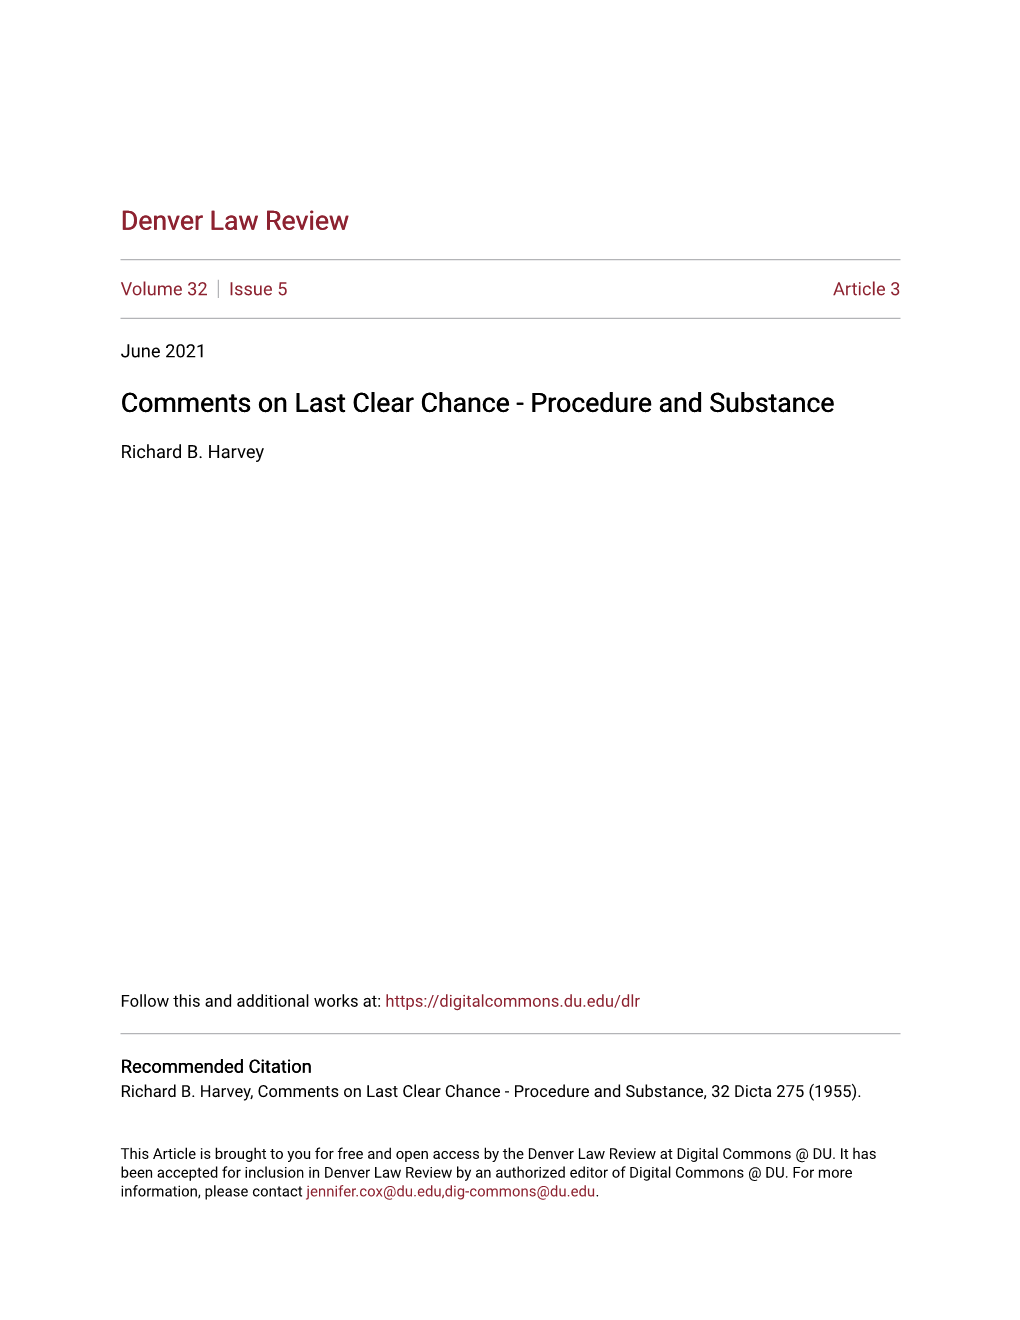 Comments on Last Clear Chance - Procedure and Substance